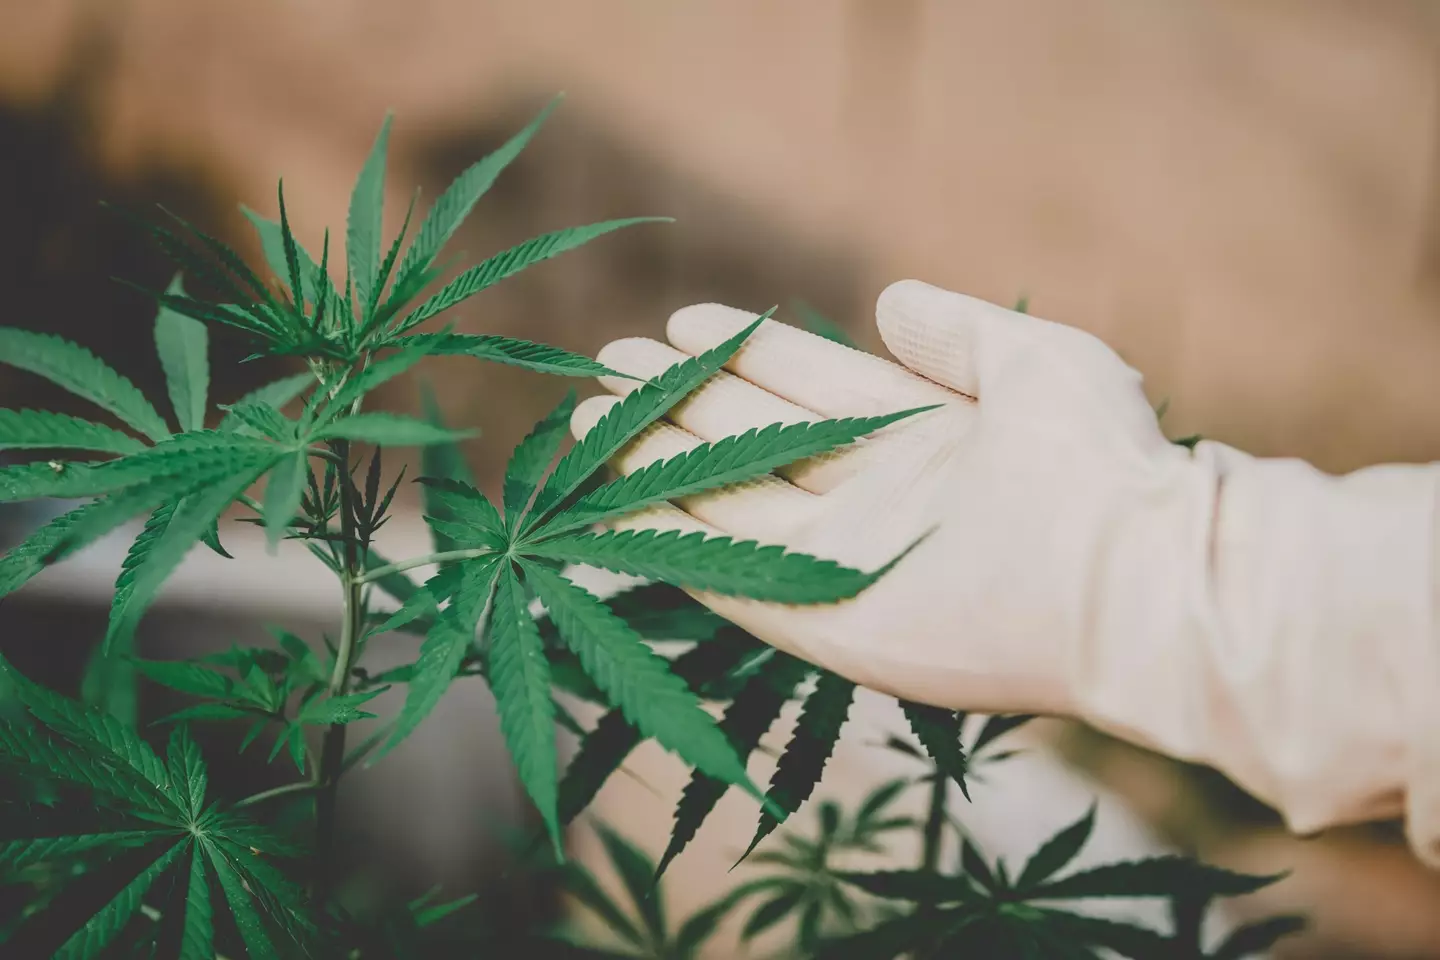 'Whole plant' medical cannabis hasn't yet been approved in the UK.